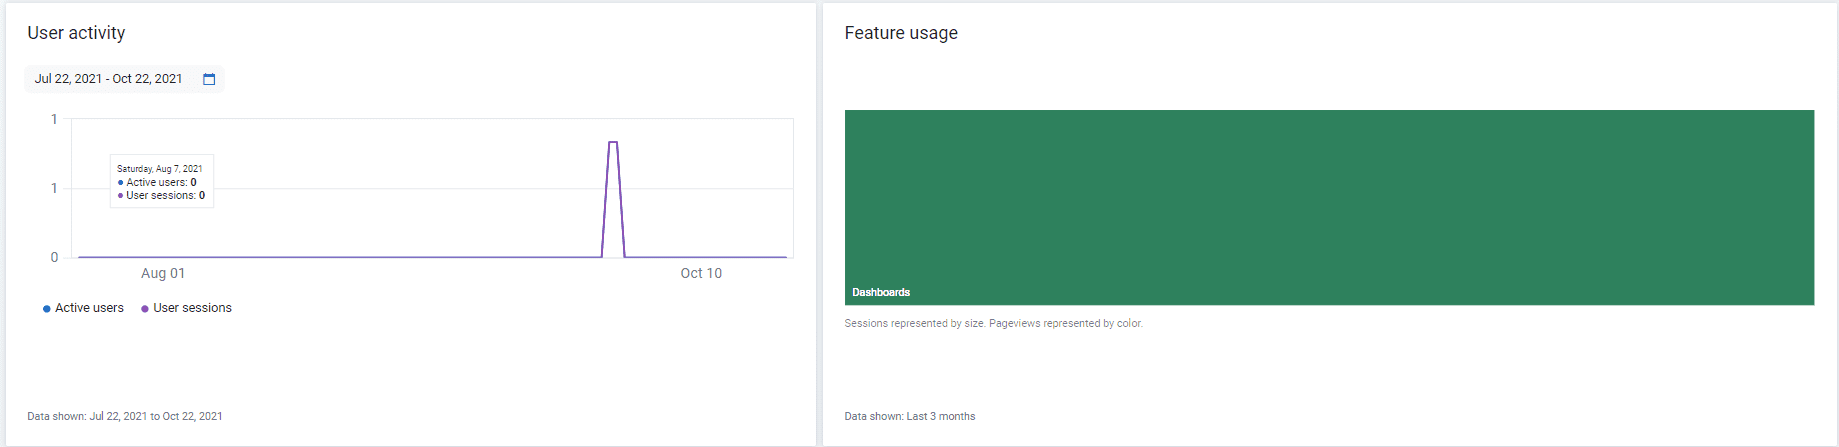 Feature usage example